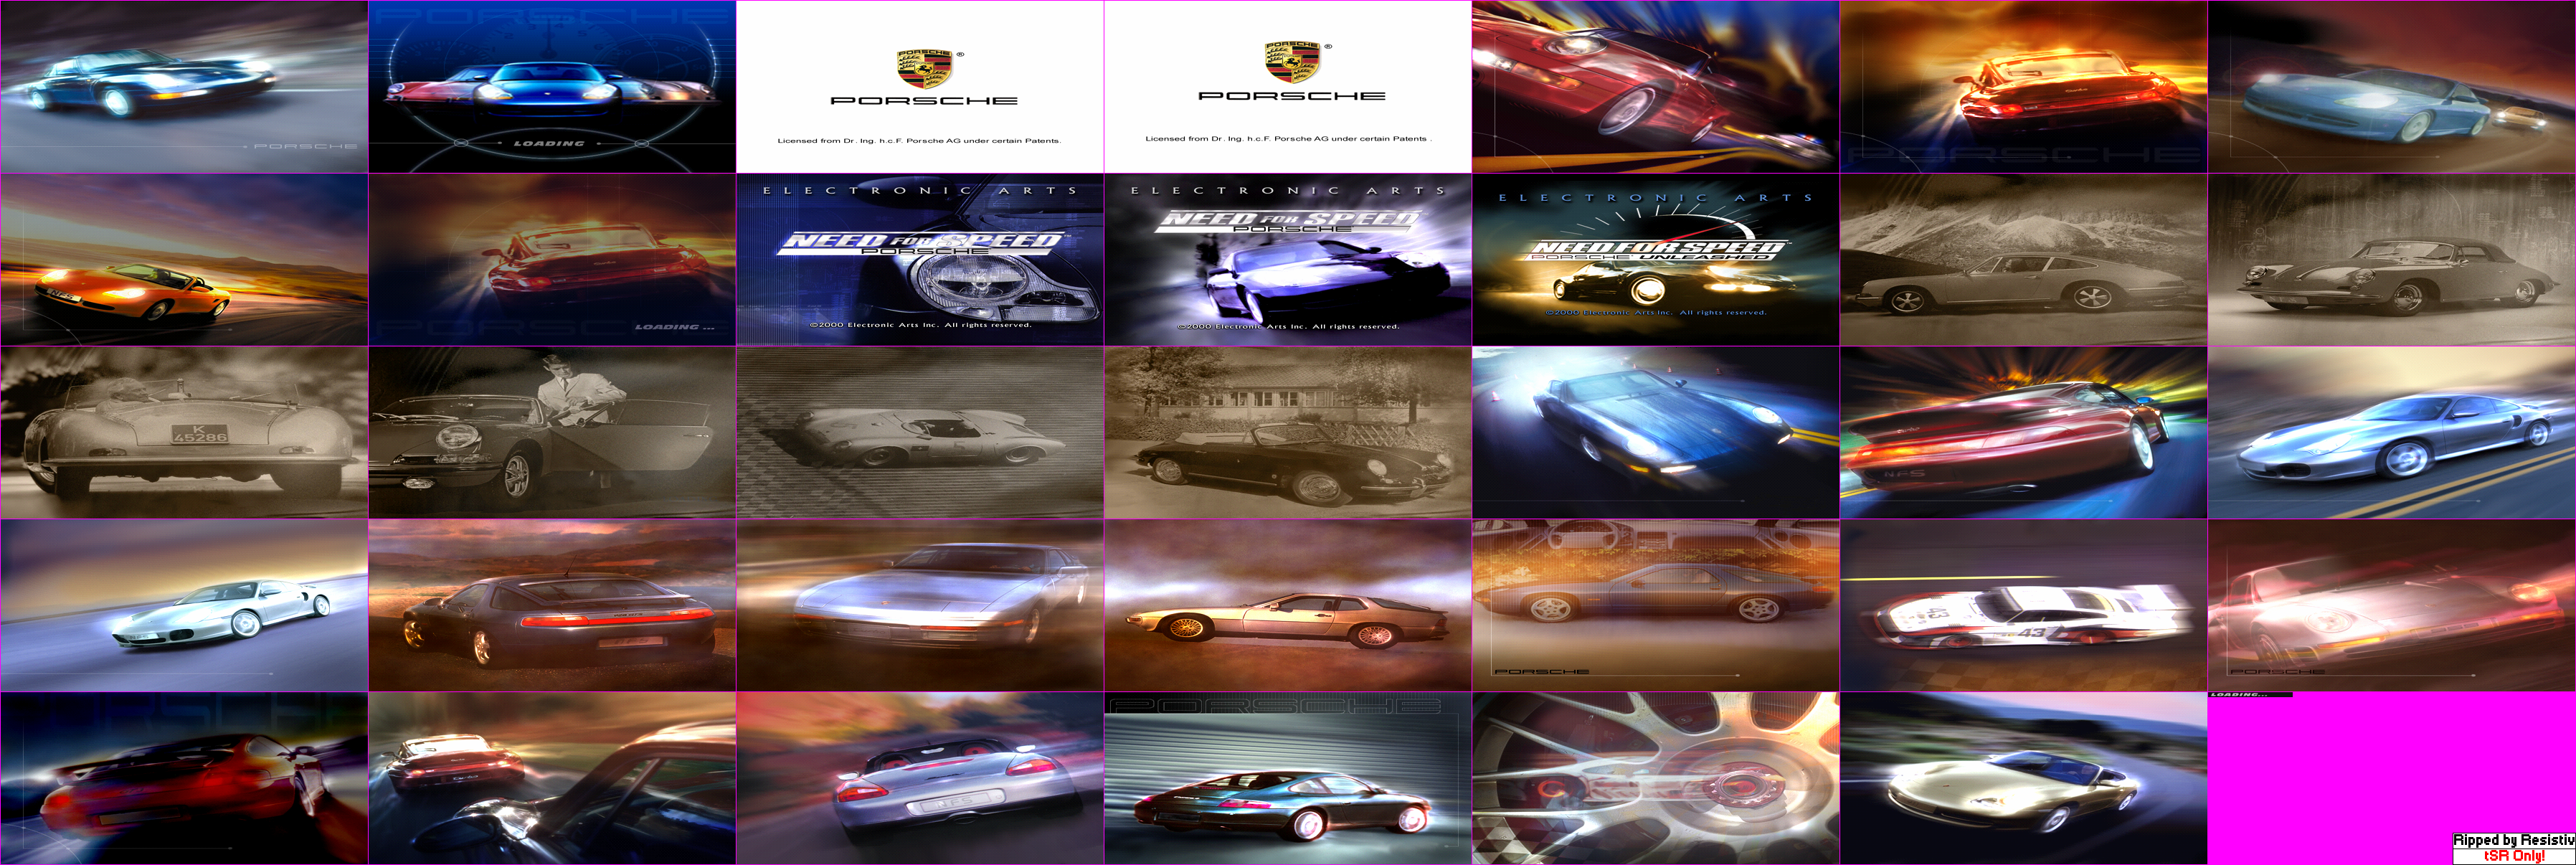 Need for Speed: Porsche Unleashed - Loading Screens